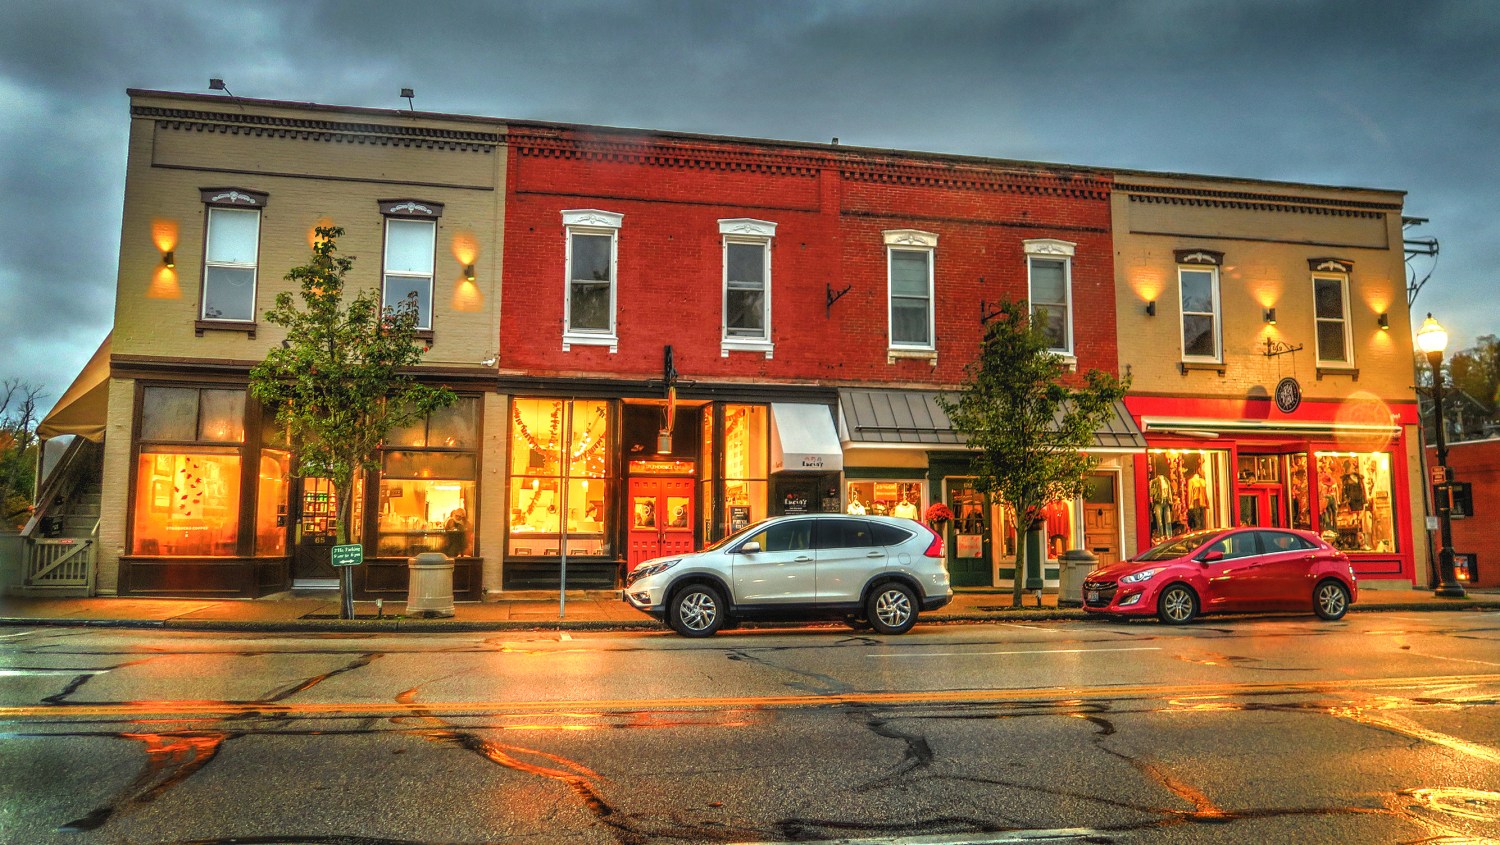 Chagrin Falls, Ohio / USA - October 29, 2017: Rainy Evening View of Starbucks, Jeni's, and Outfitters Shops on Main Street in the Business District of Historical Downtown Chagrin Falls, Ohio